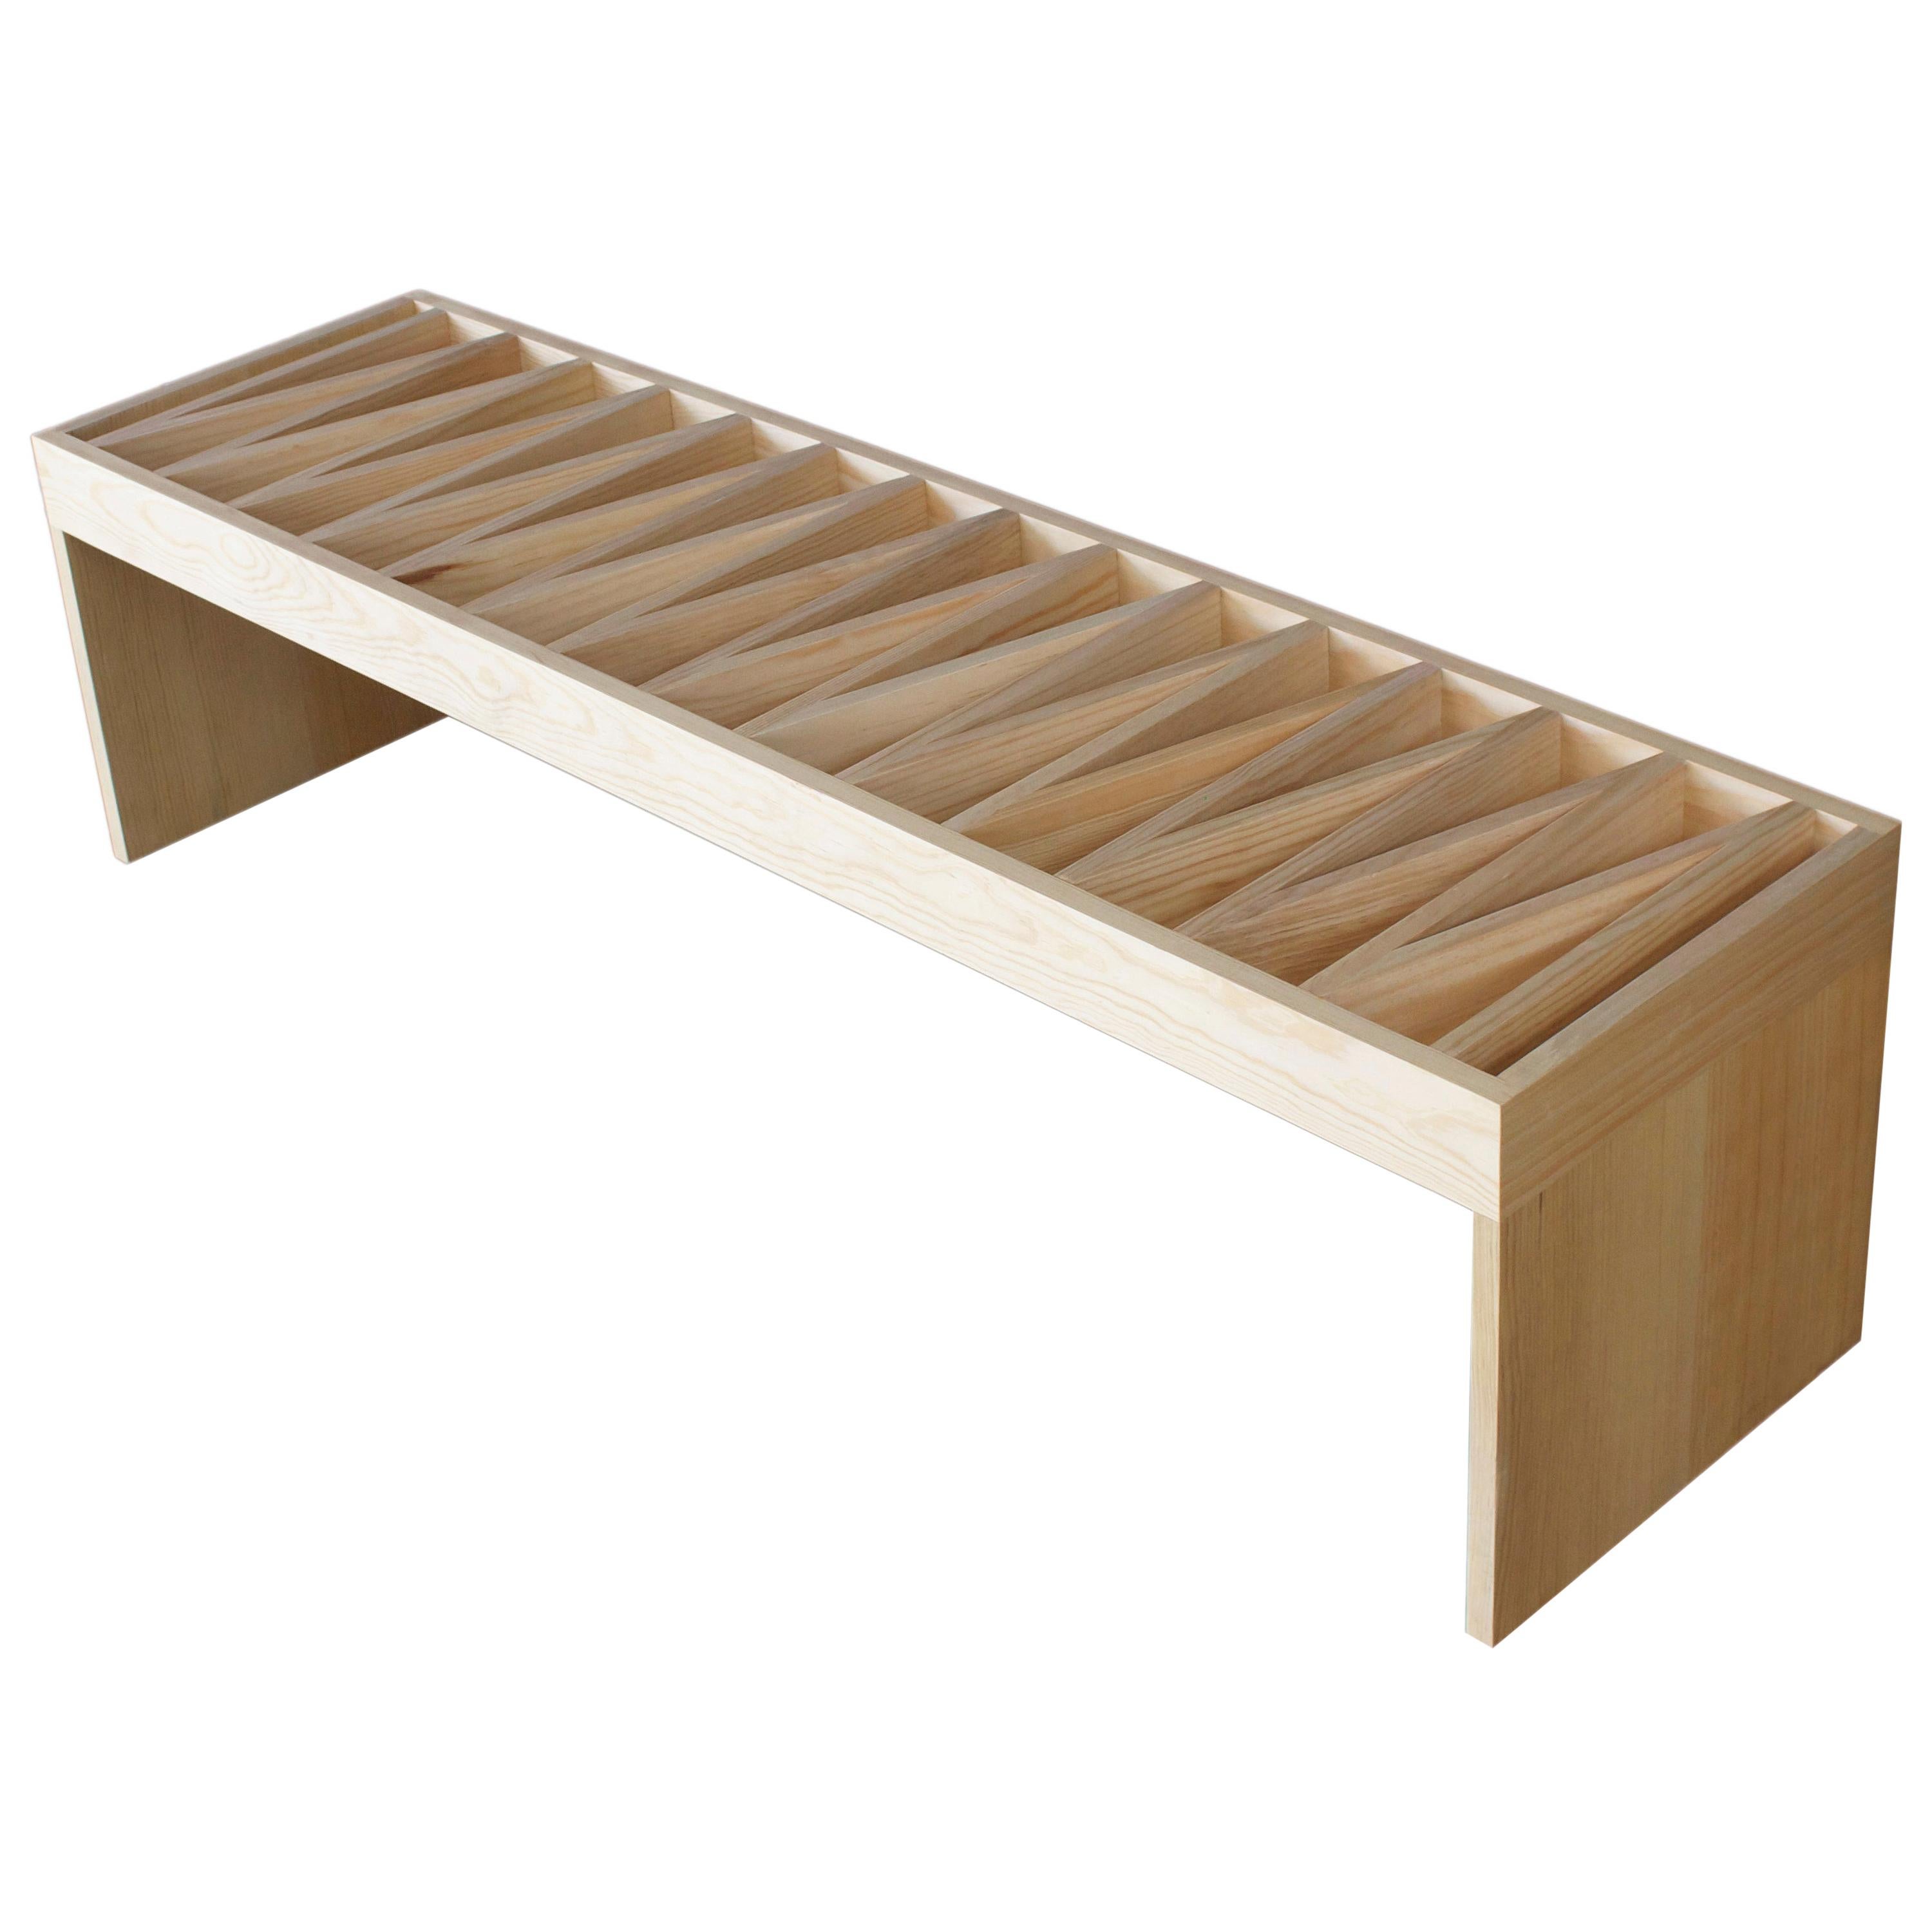 Banca Mia Bench by Maria Beckmann, Represented by Tuleste Factory For Sale